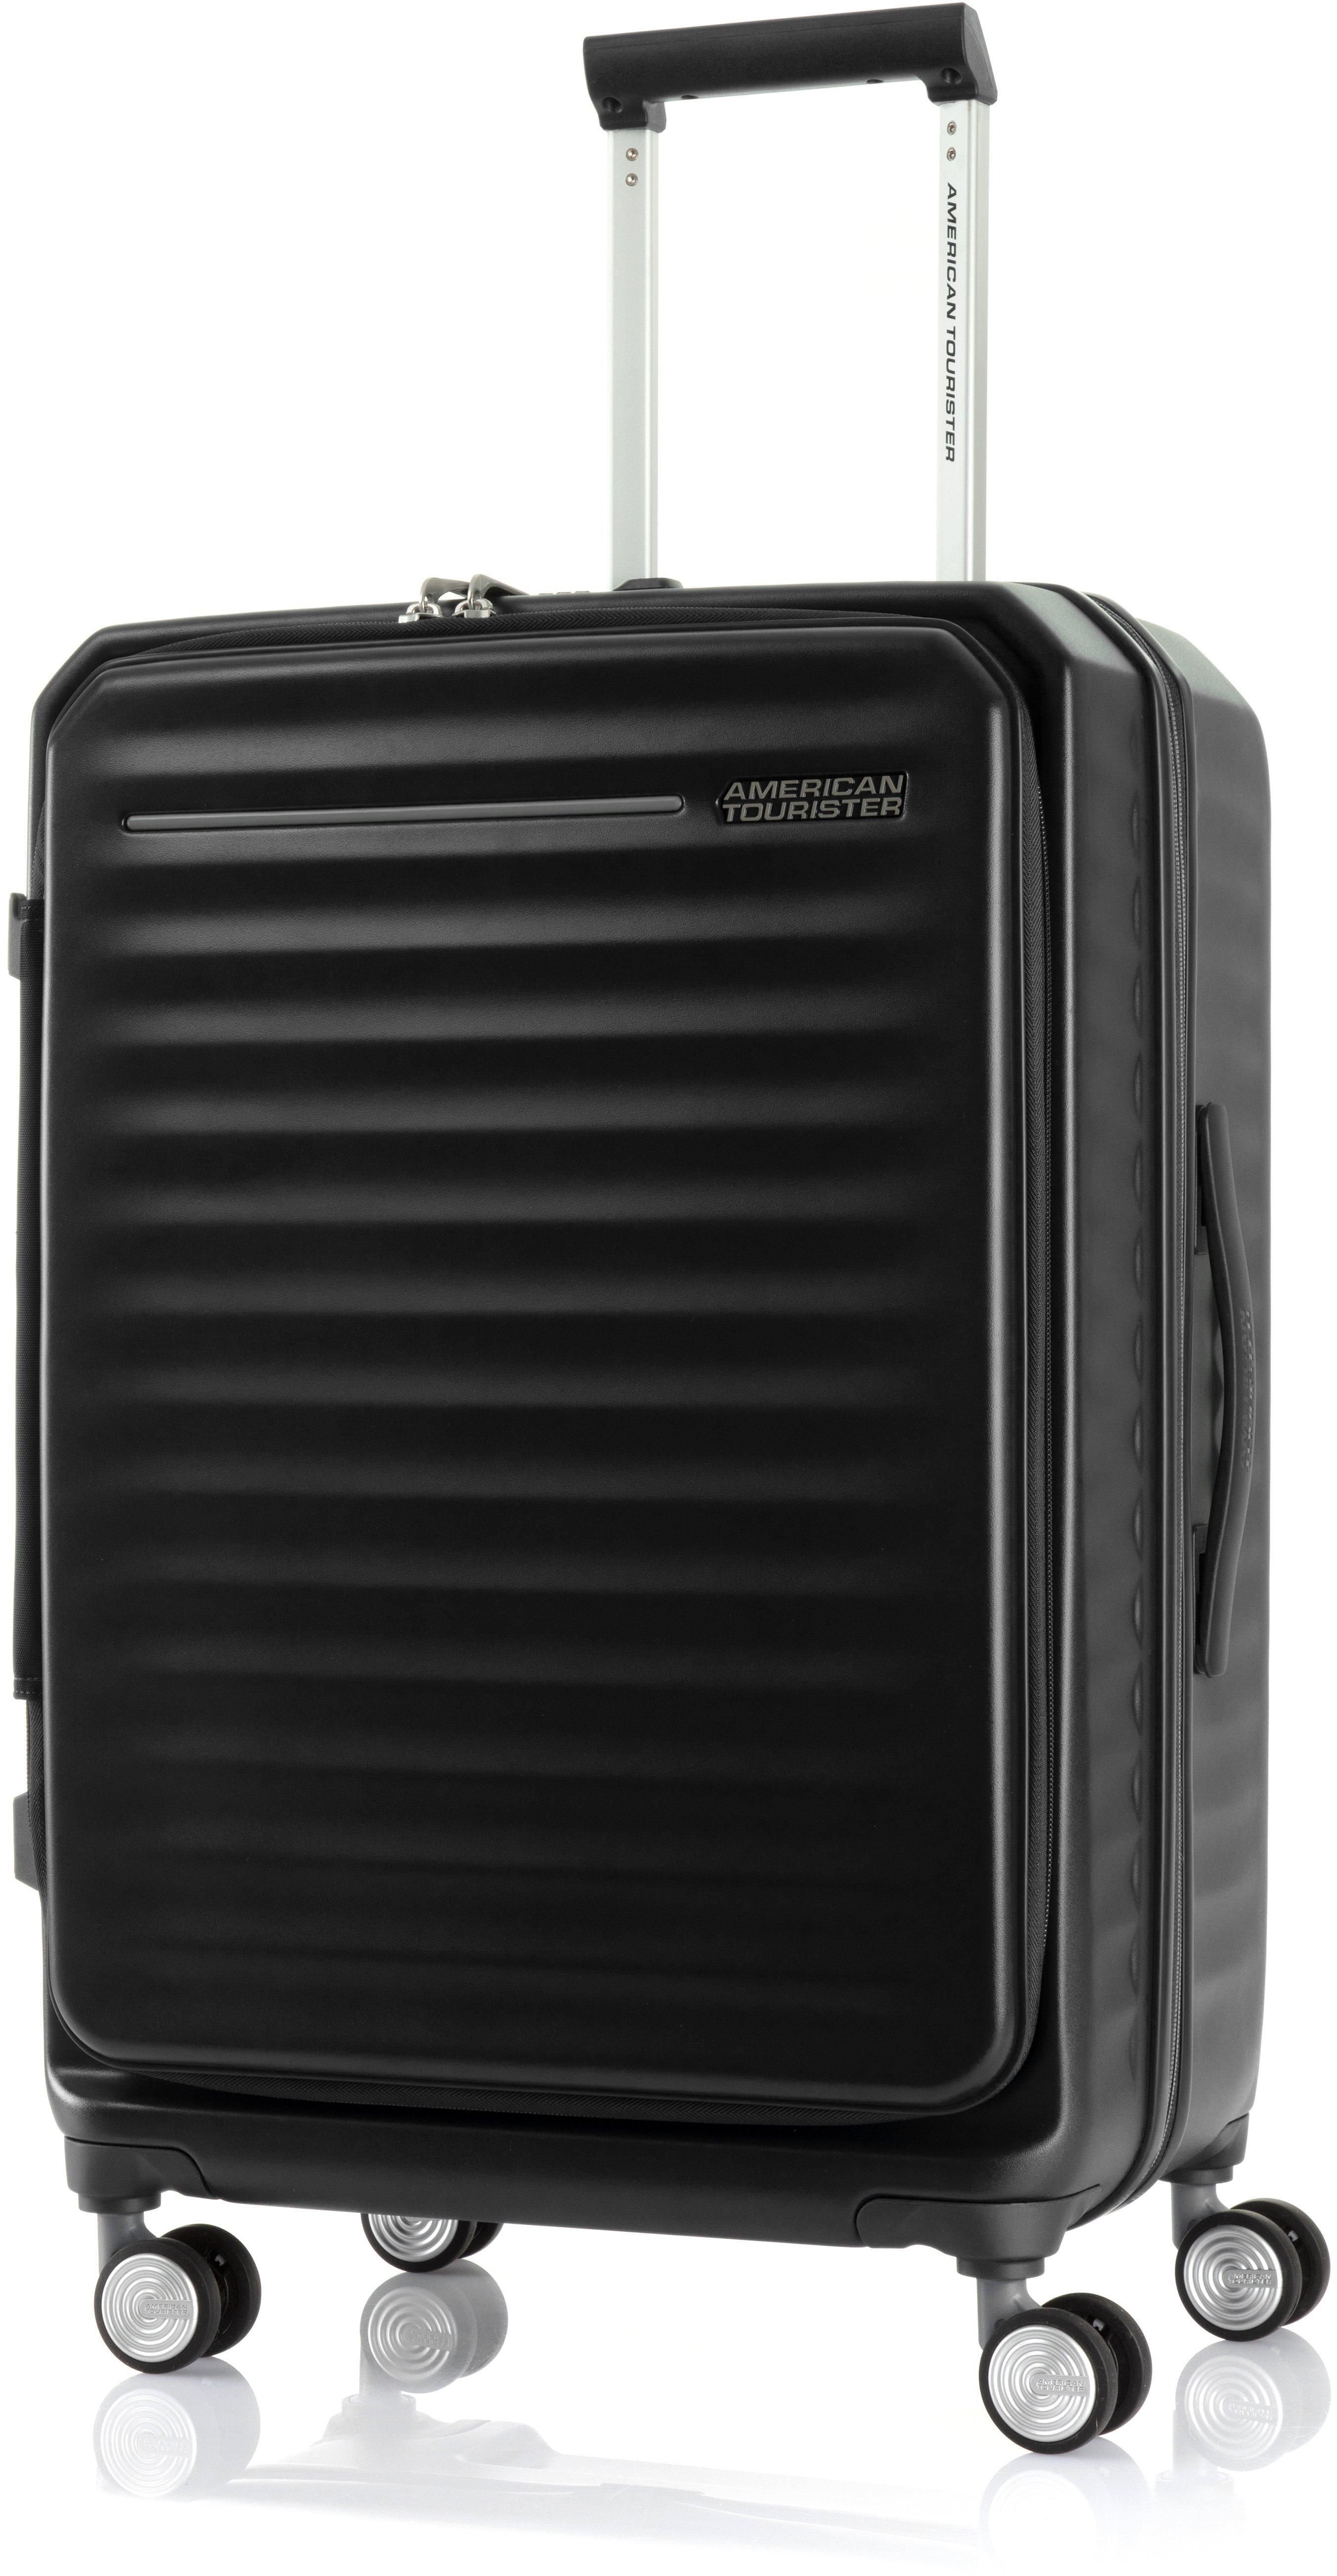 American Tourister Frontec Spinner 54/19, Hard PC Luggage Trolley Case, Black